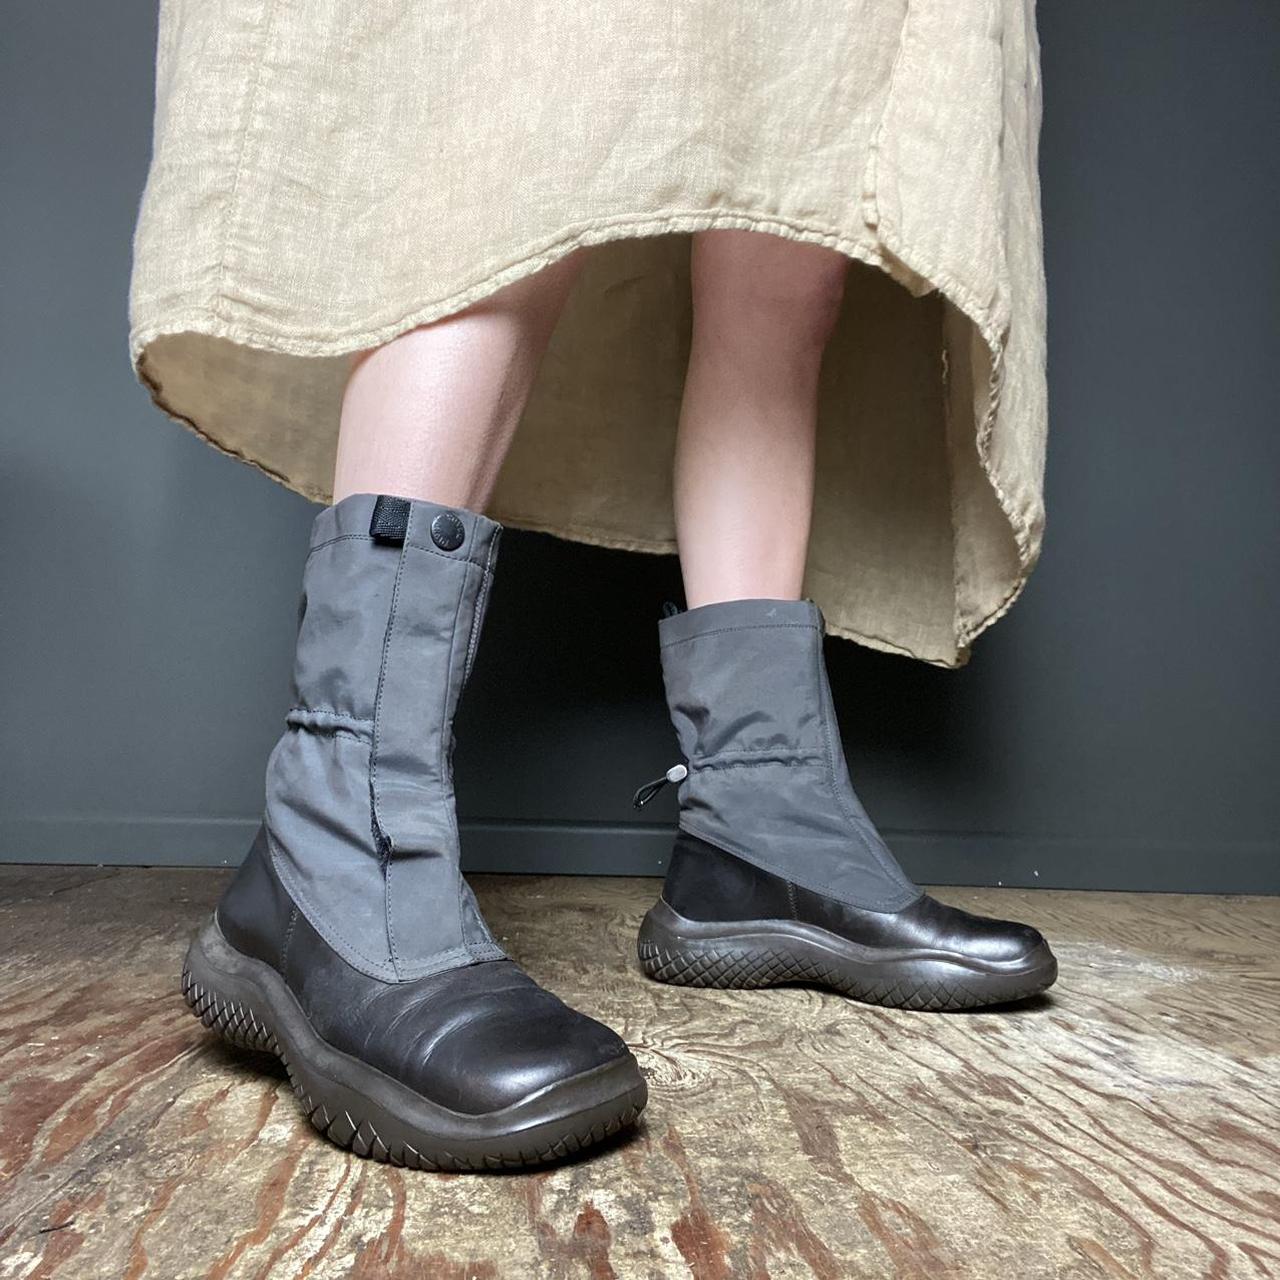 Edgy and Iconic: Prada 99 Boots